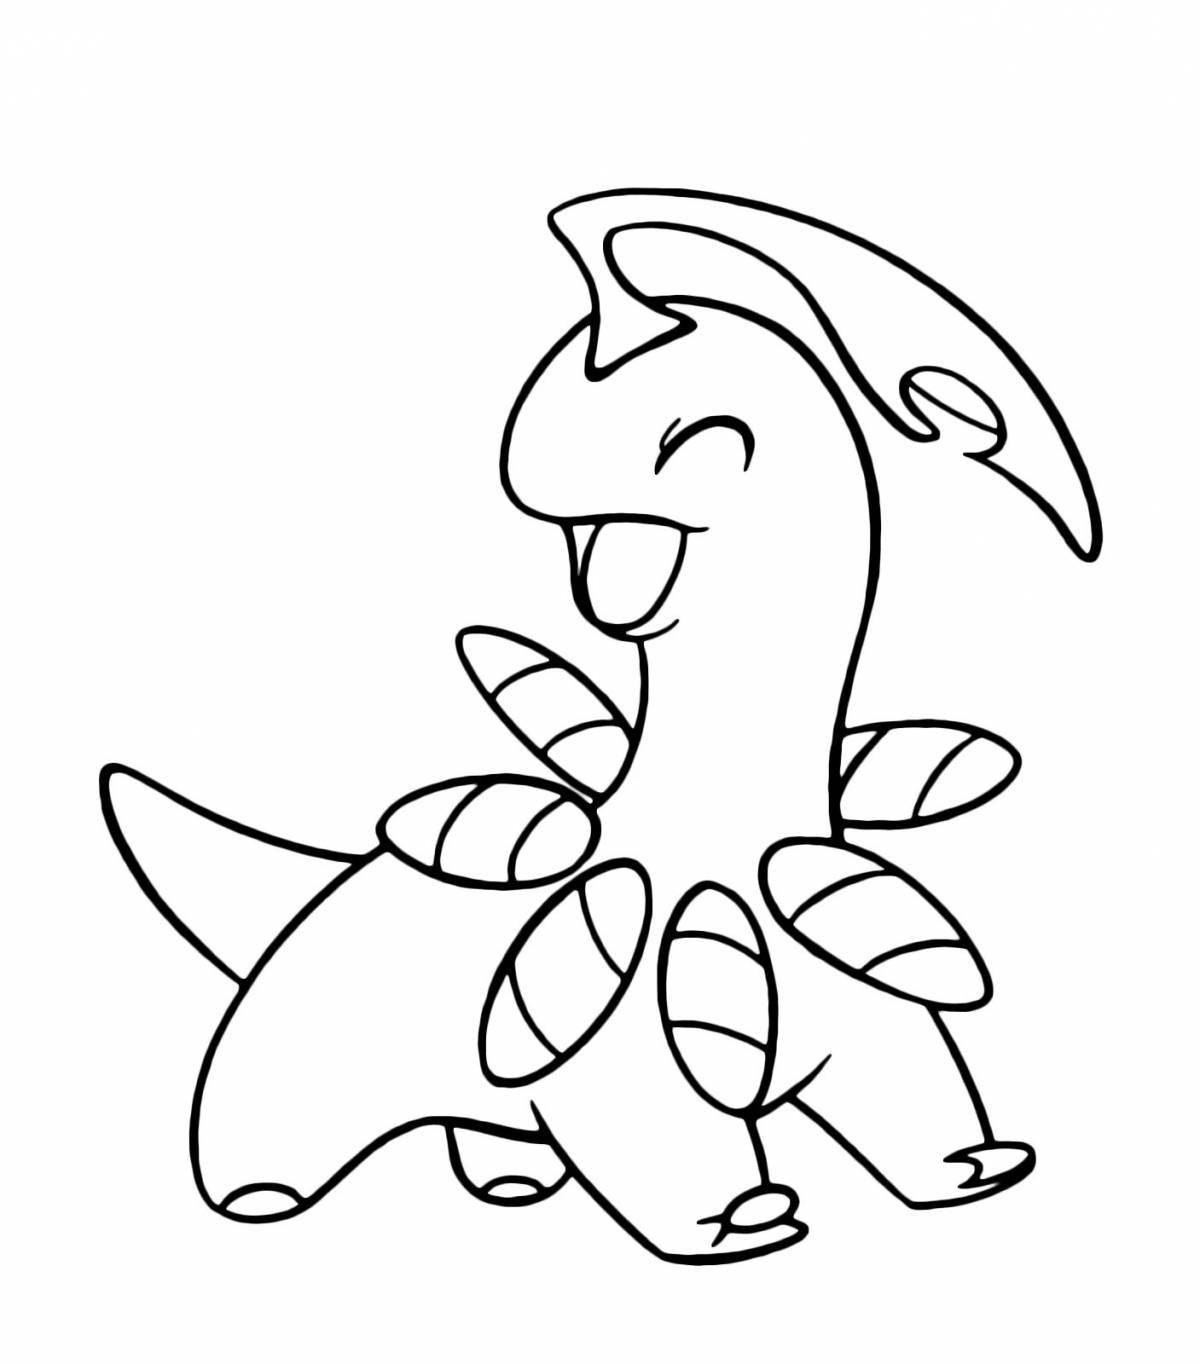 Fascinating pokemon coloring pages